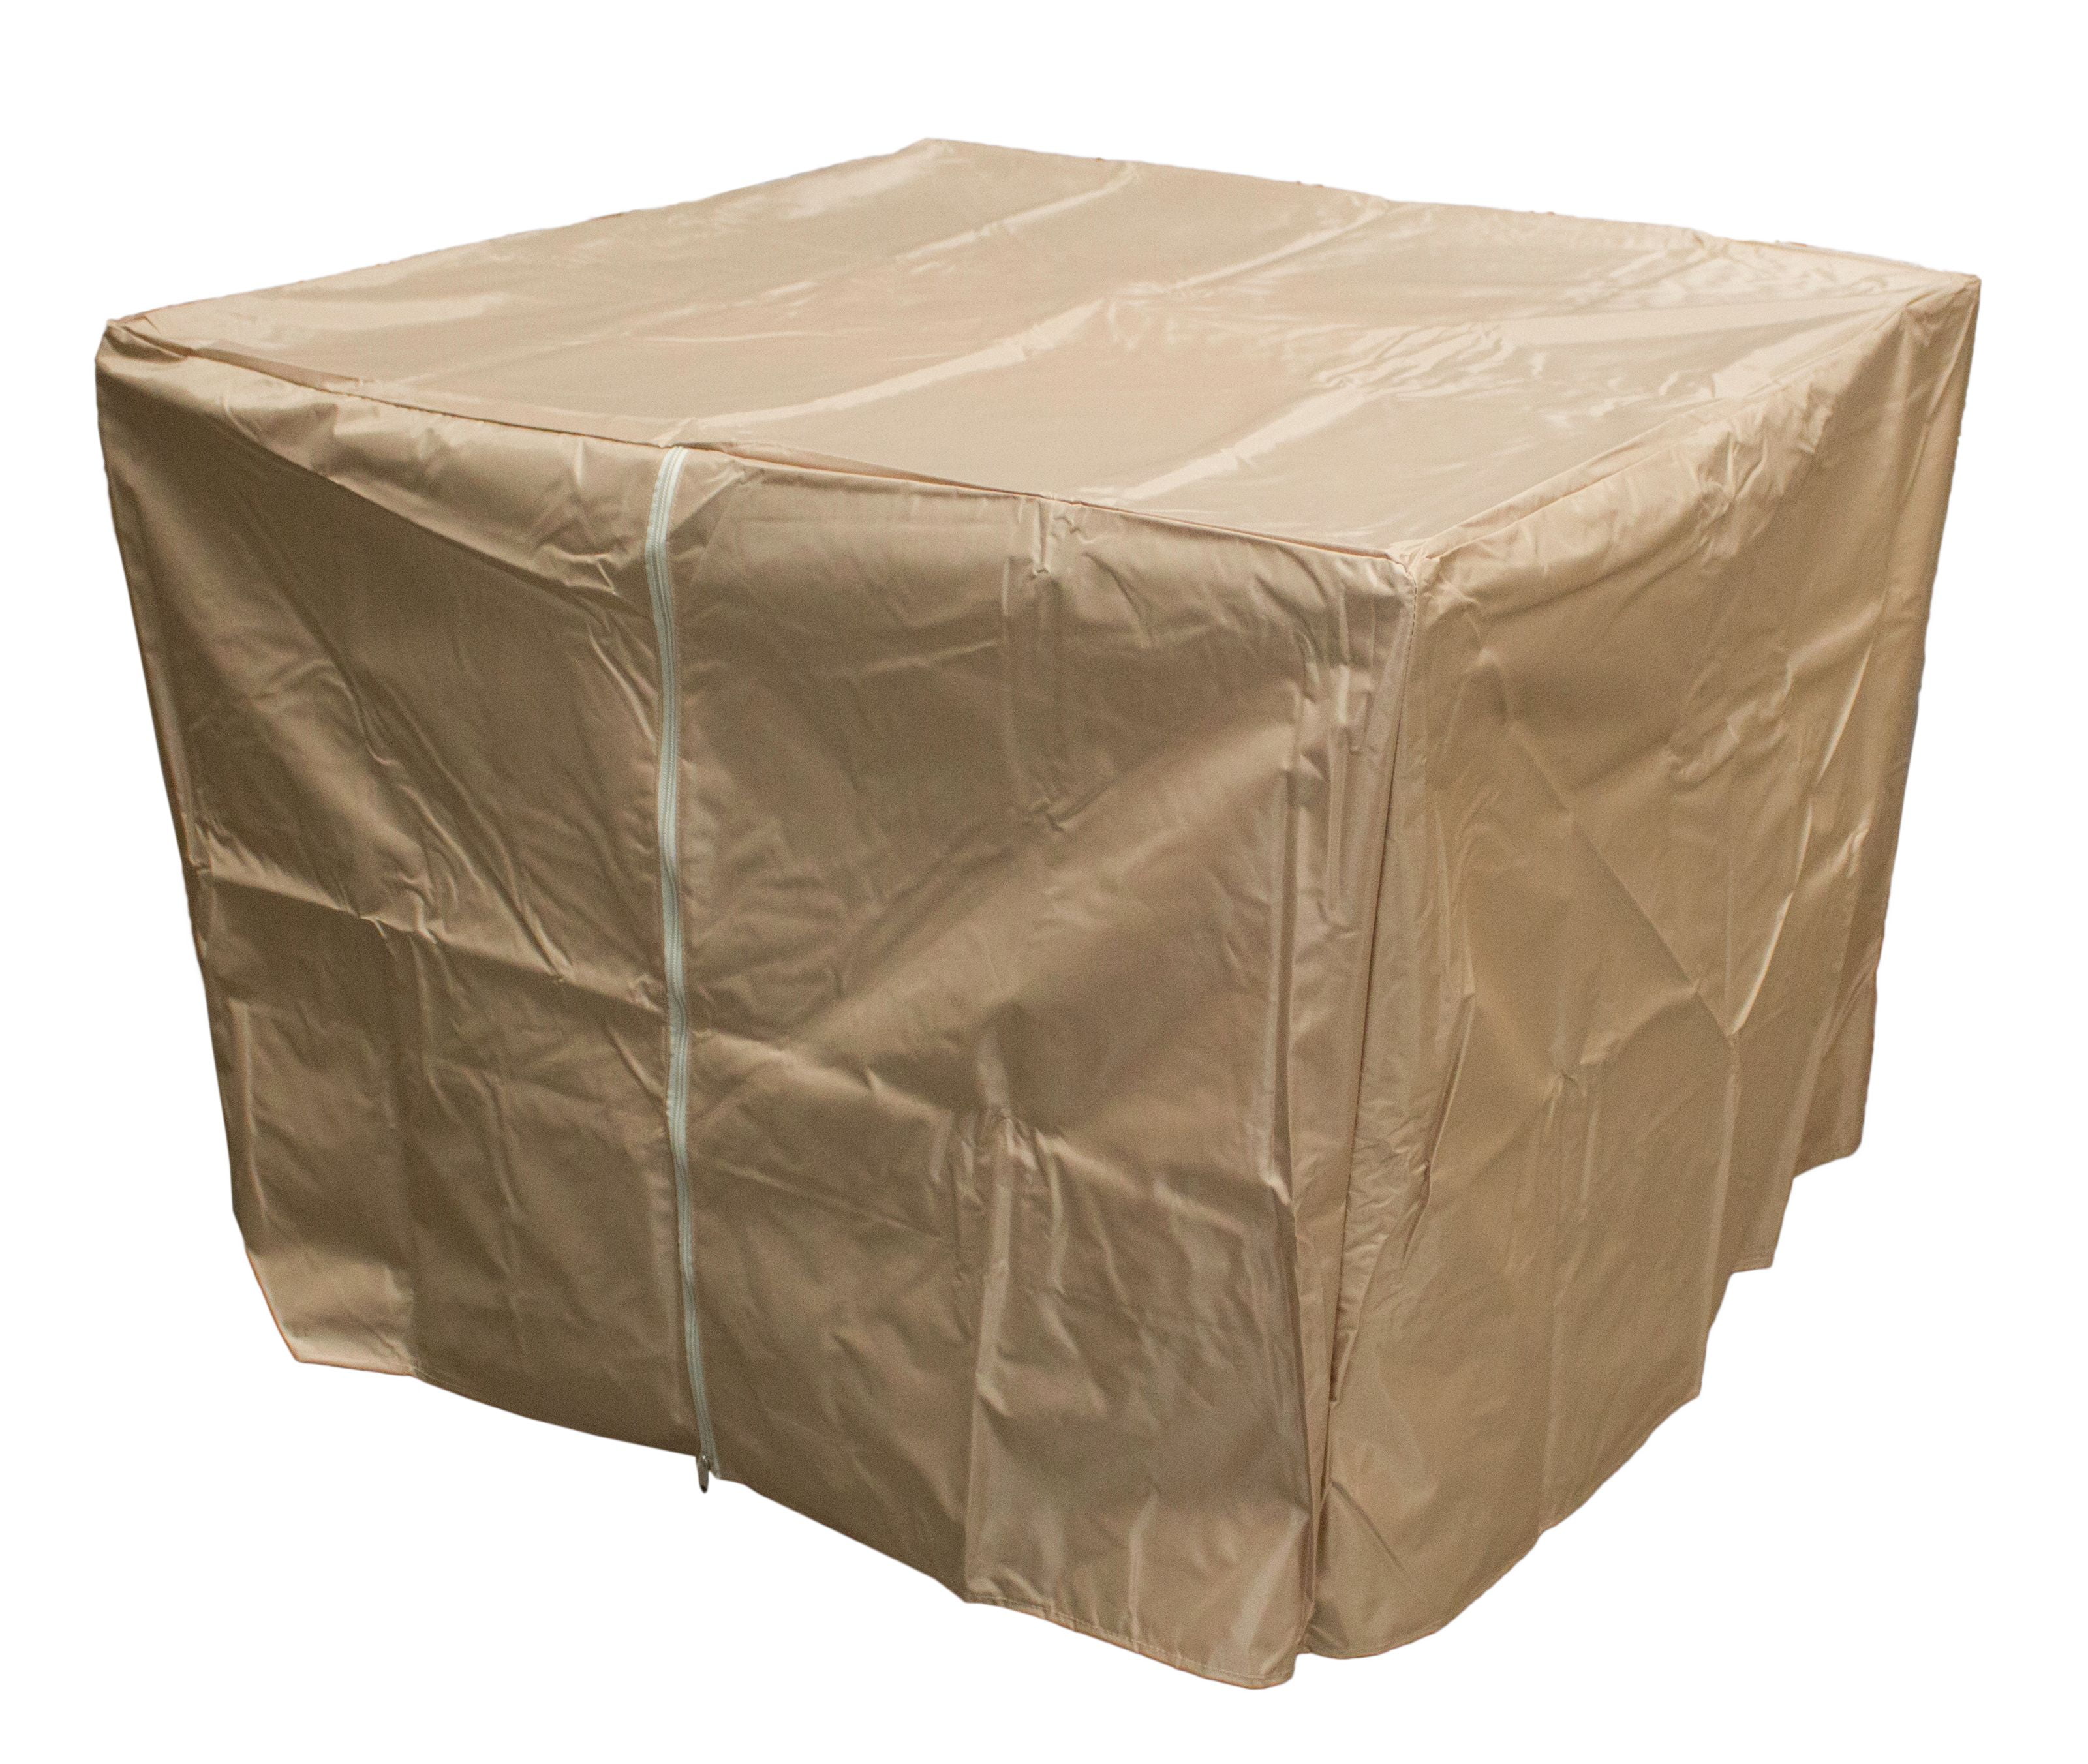 Waterproof Propane Fire Pit Cover, Plastic Fire Pit Cover